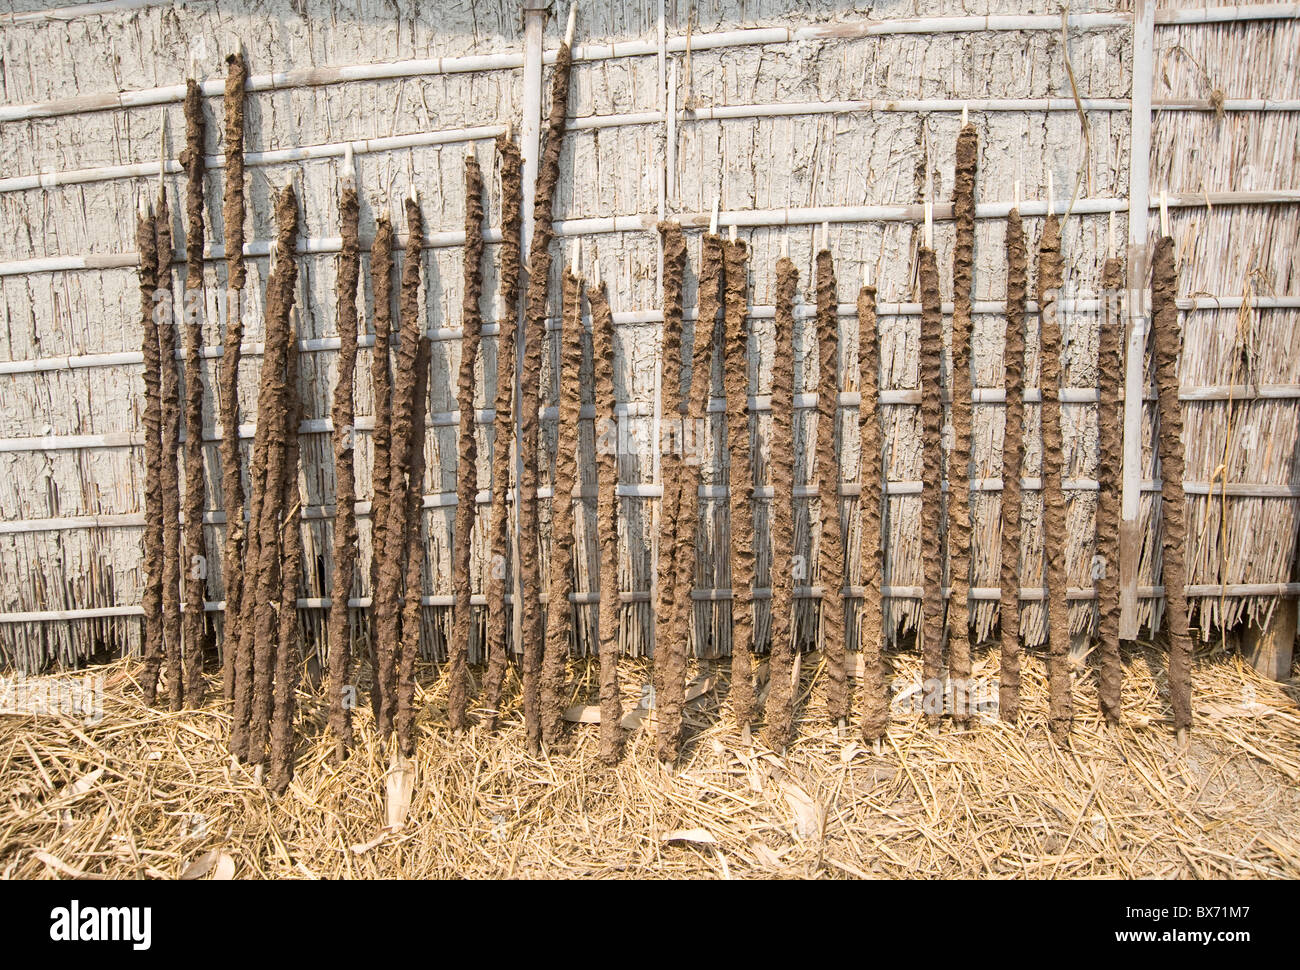 Cattle dung pressed onto sticks to be sun dried and used as cooking fuel, Nalvara village, Assam, India, Asia Stock Photo